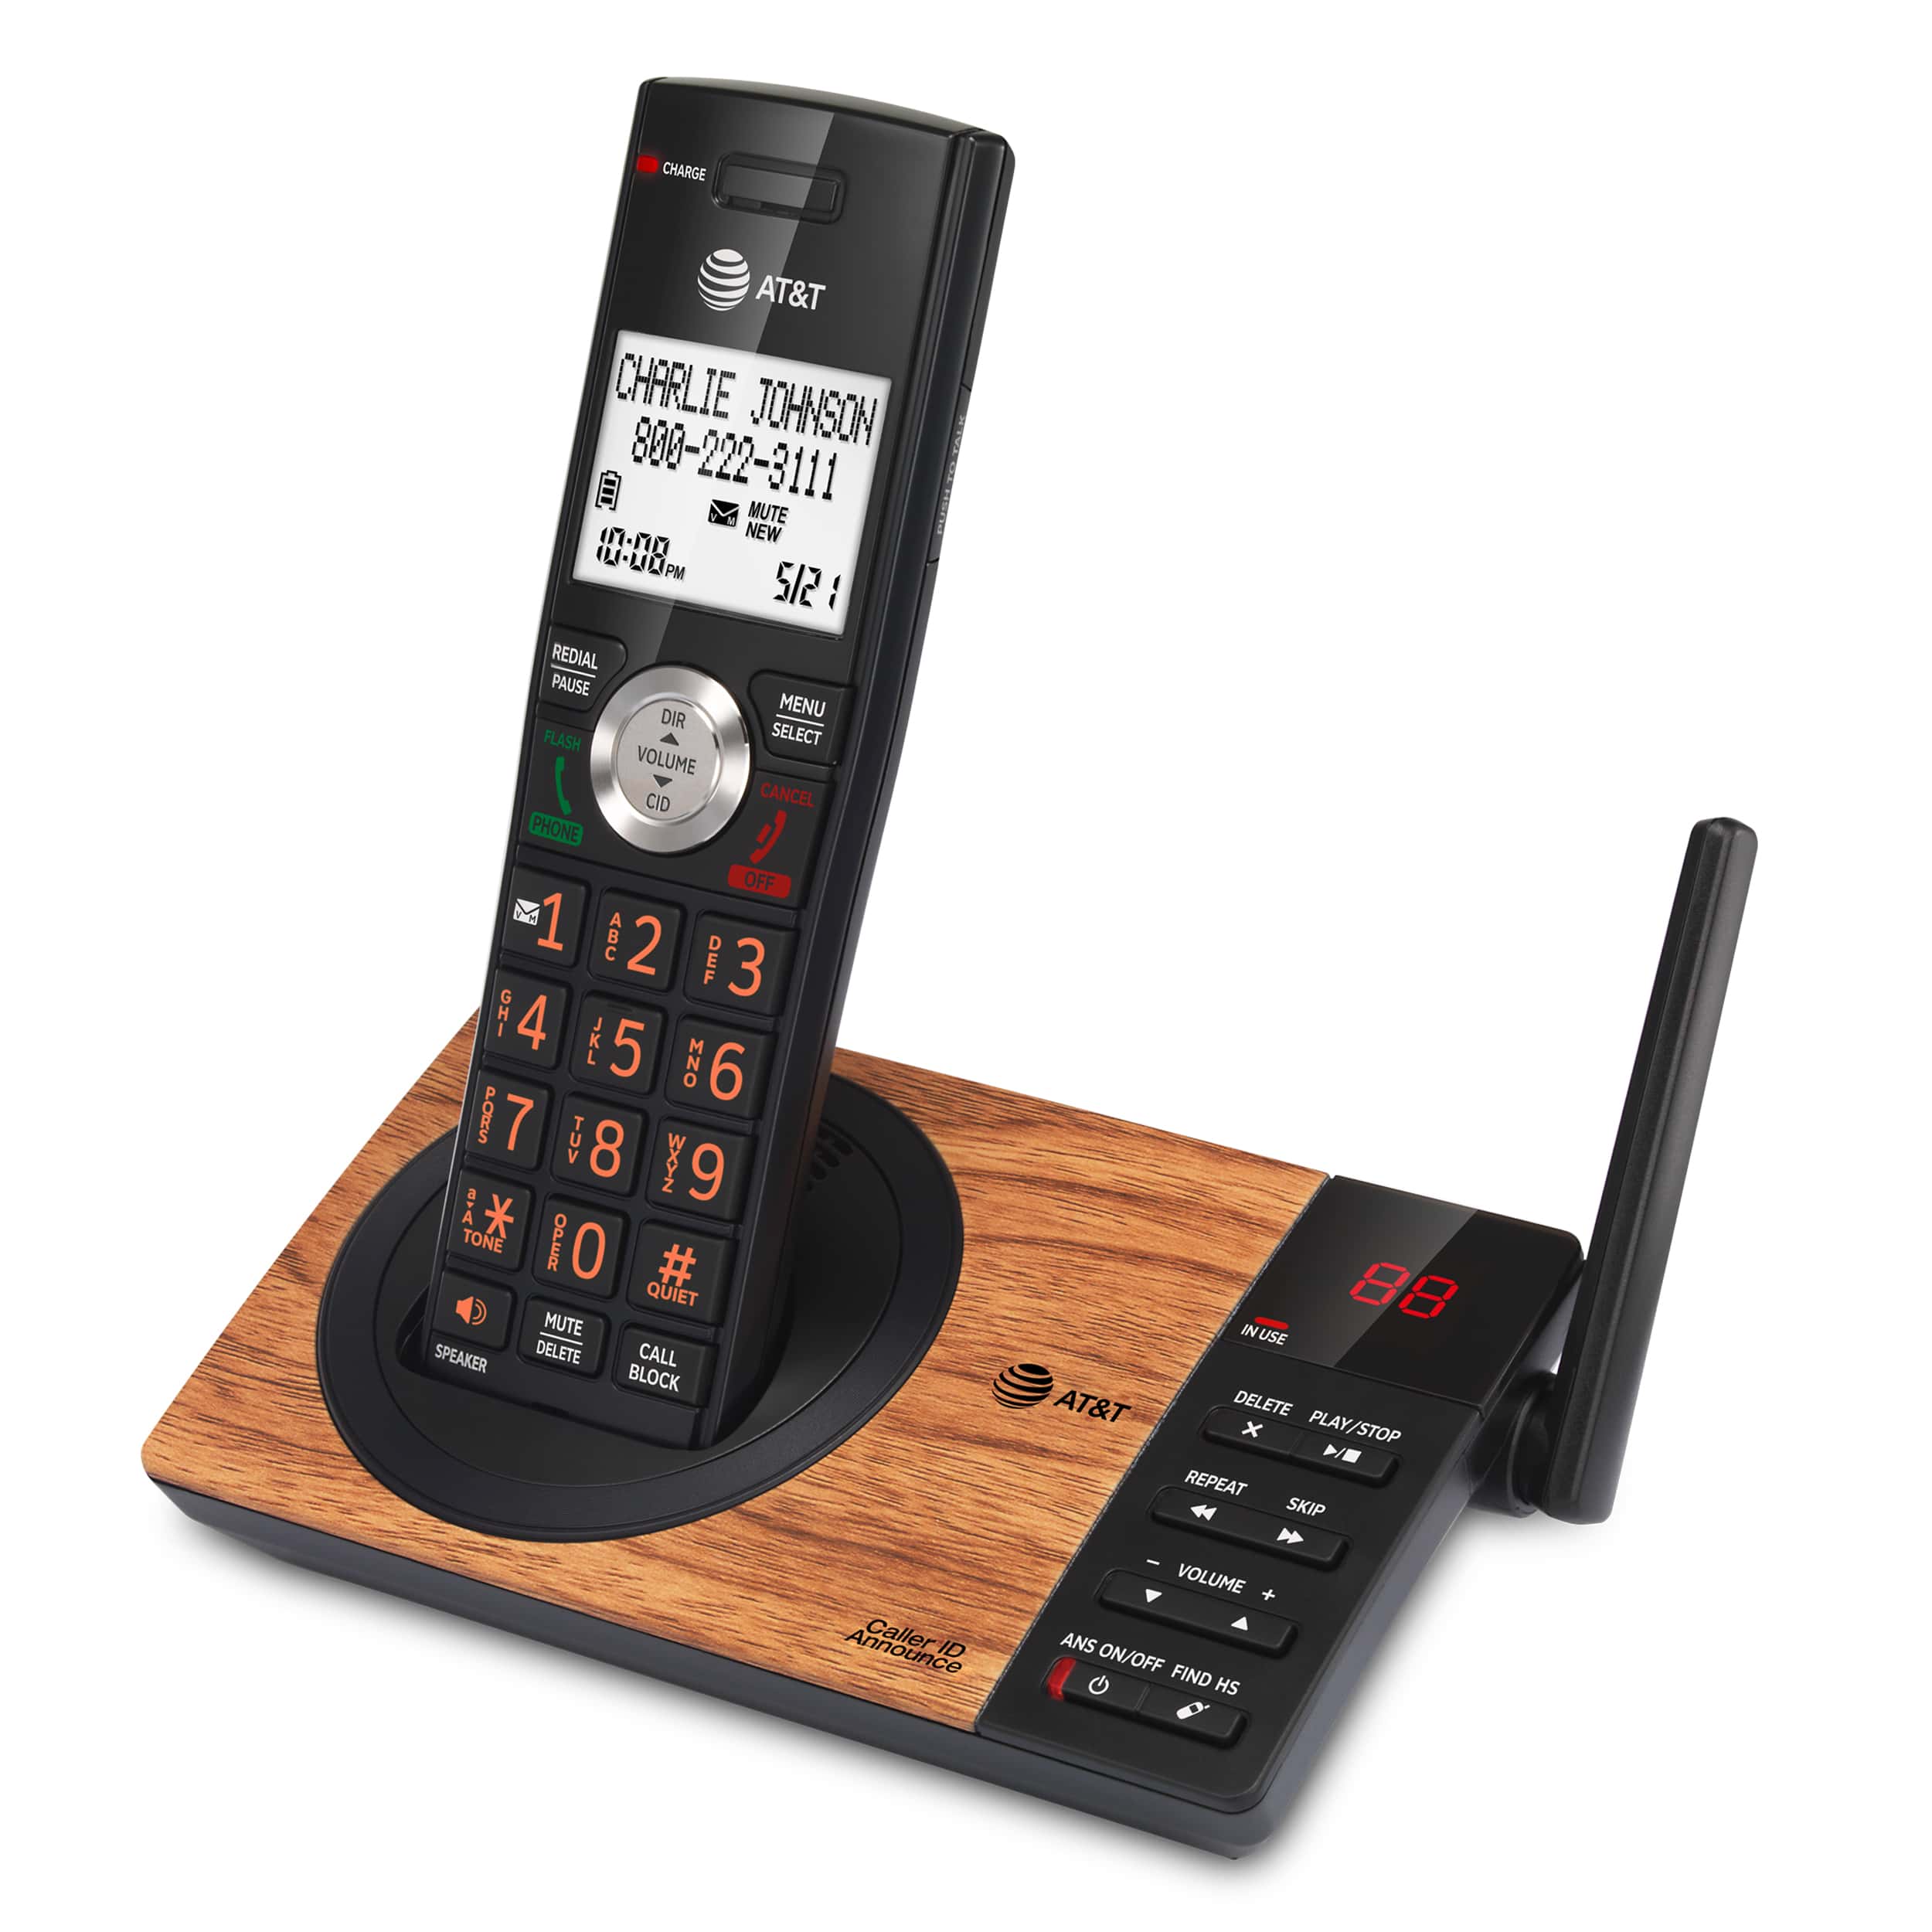 1-Handset Expandable Cordless Phone with Unsurpassed Range, Smart Call Blocker and Answering System - view 2